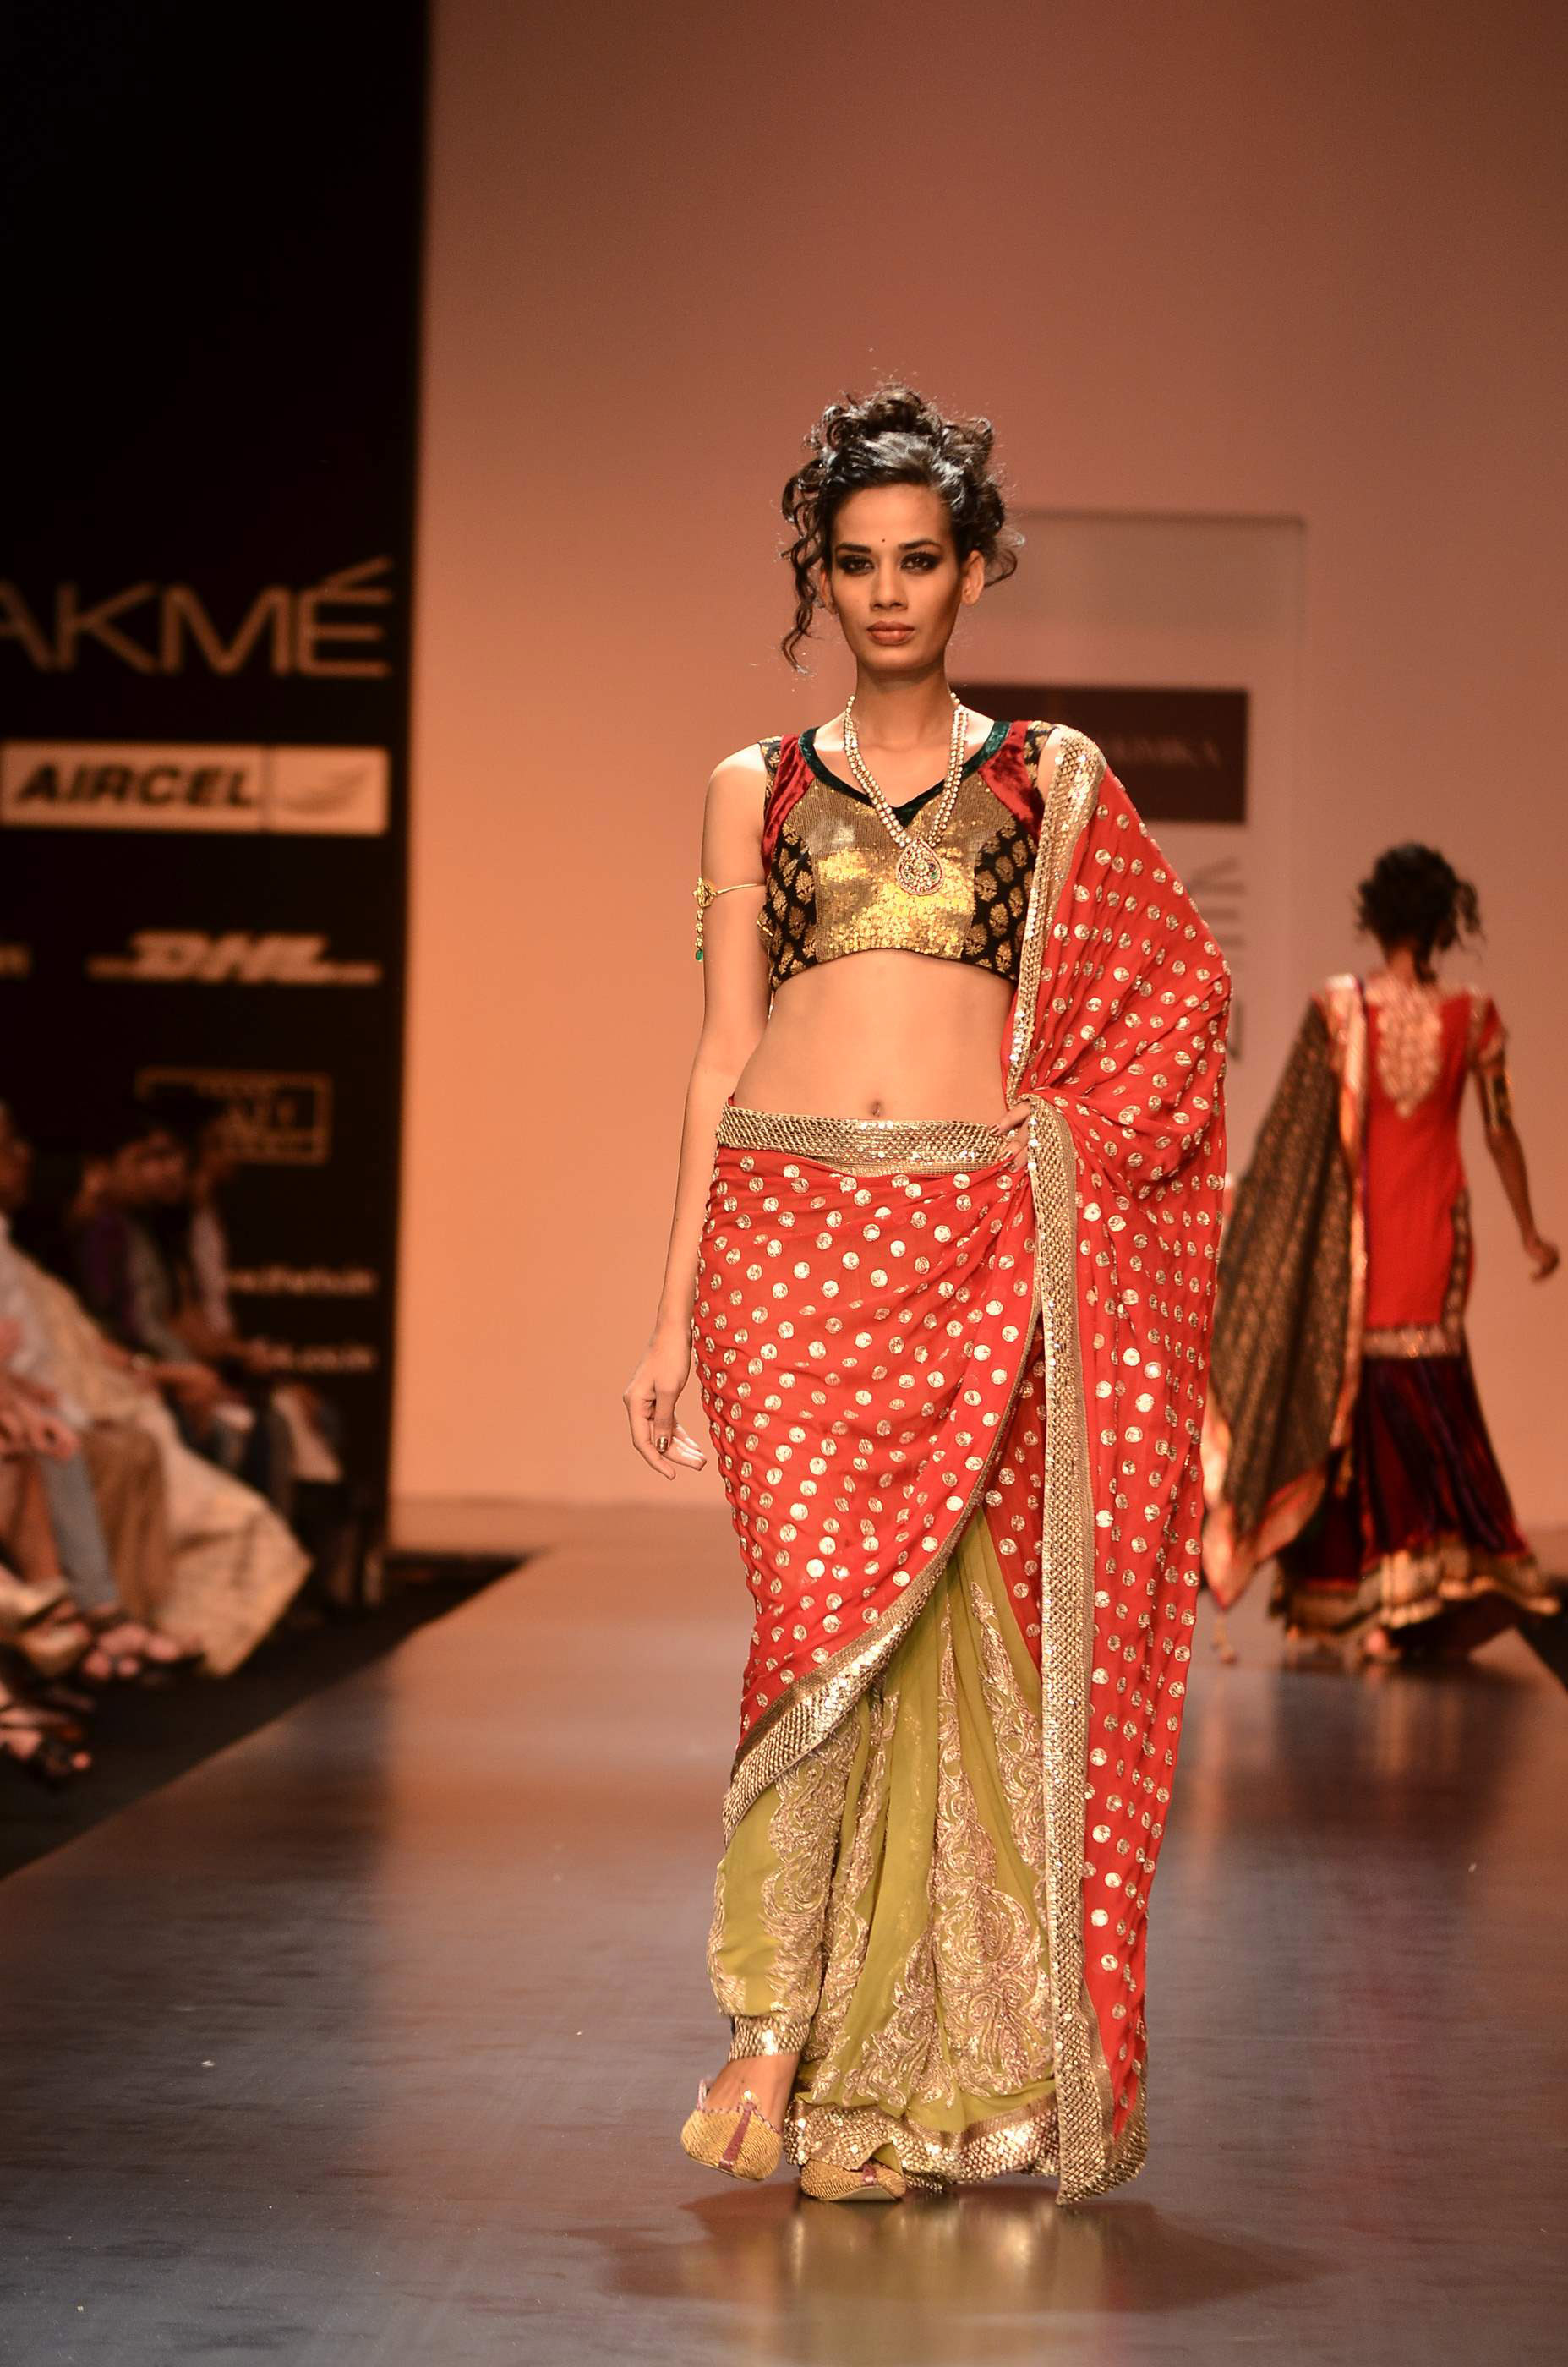 Lakme Fashion Week 2011 Day 3 Pictures | Picture 62293